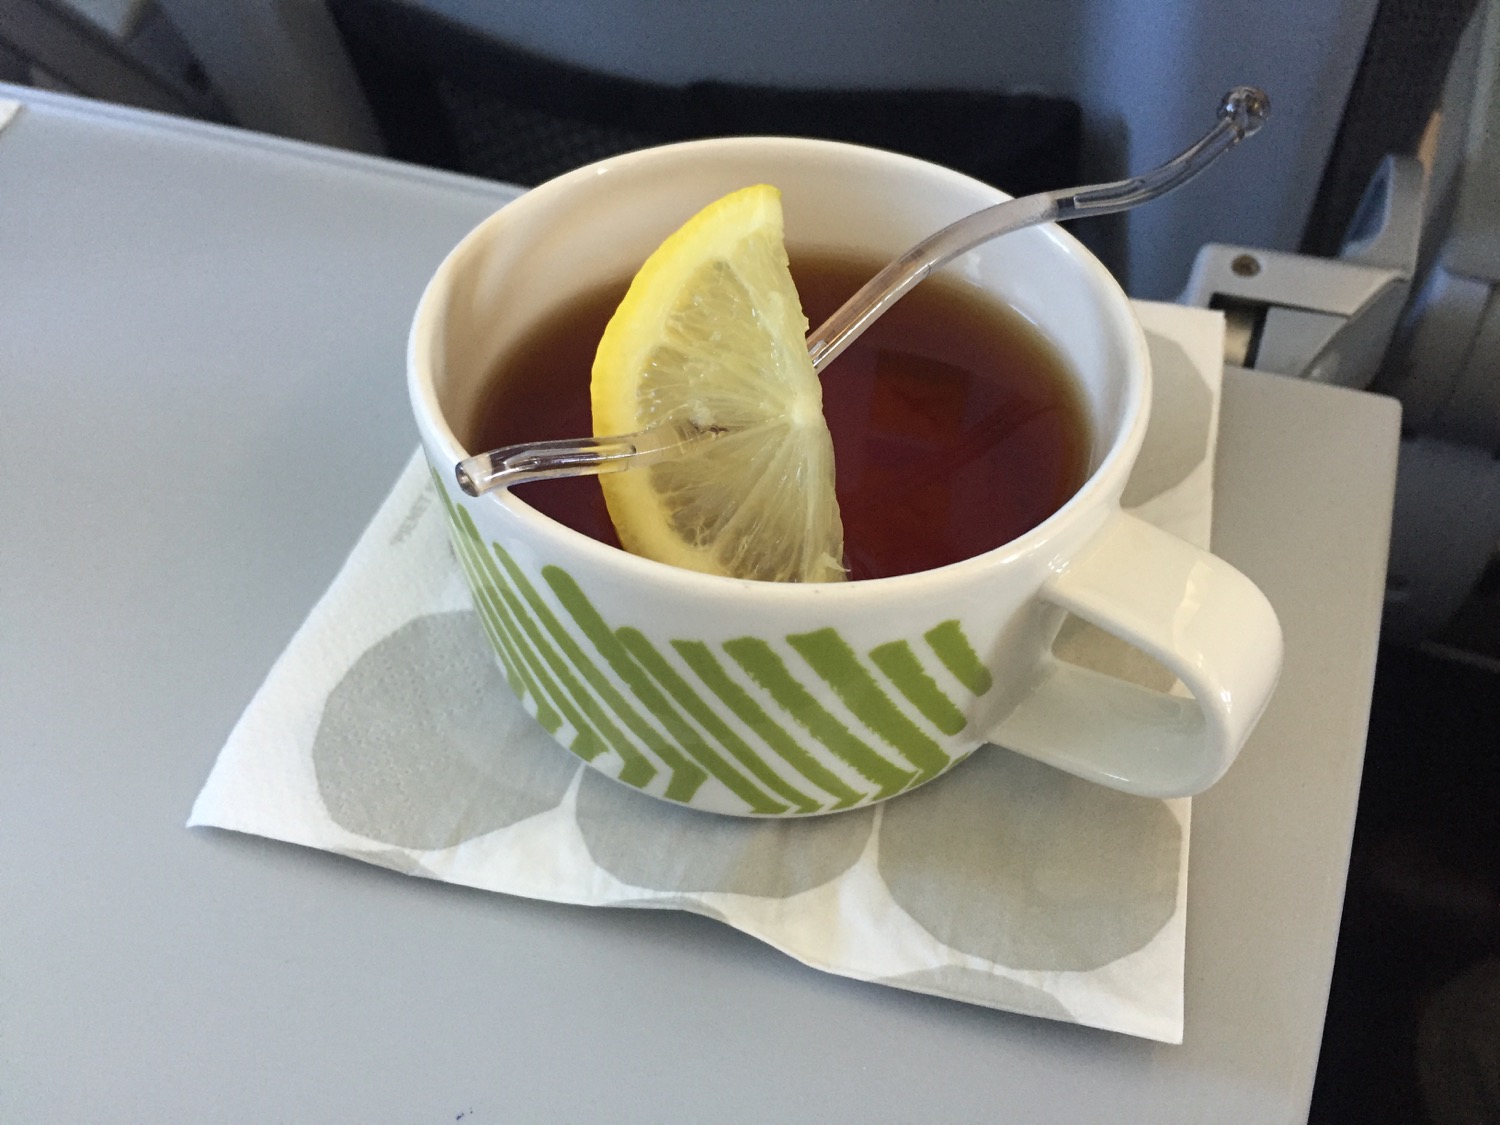 a cup of tea with a lemon slice in it